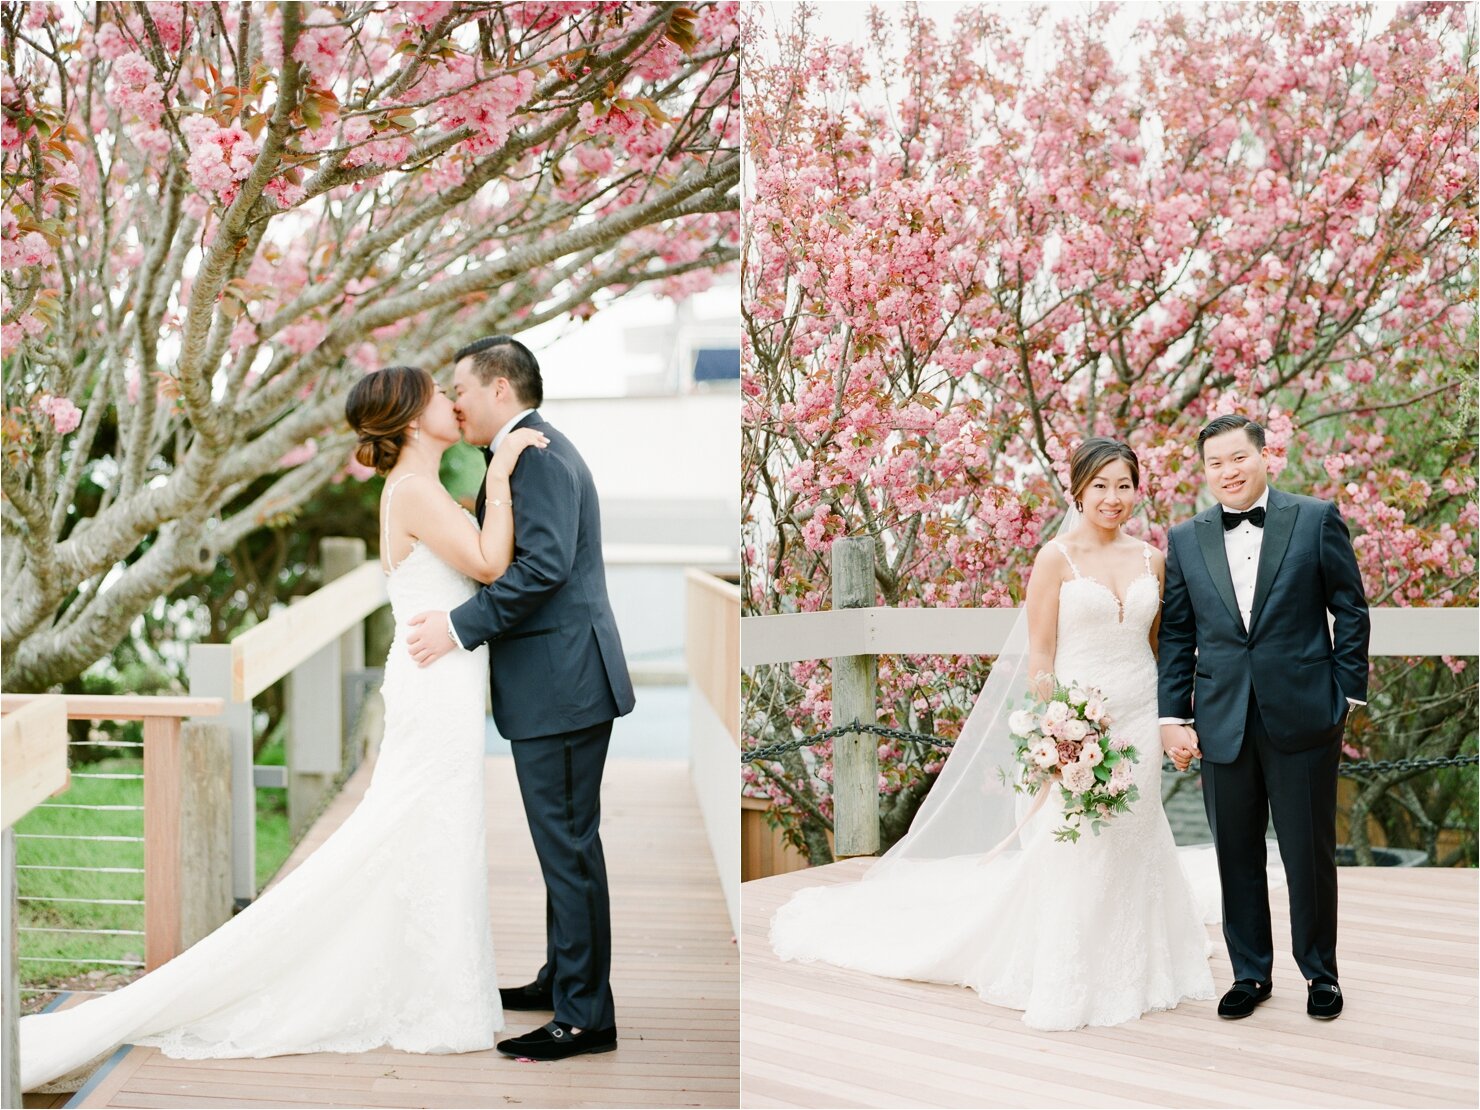 First Look Photo in front of Cherry Blossoms at Gurney's Montauk